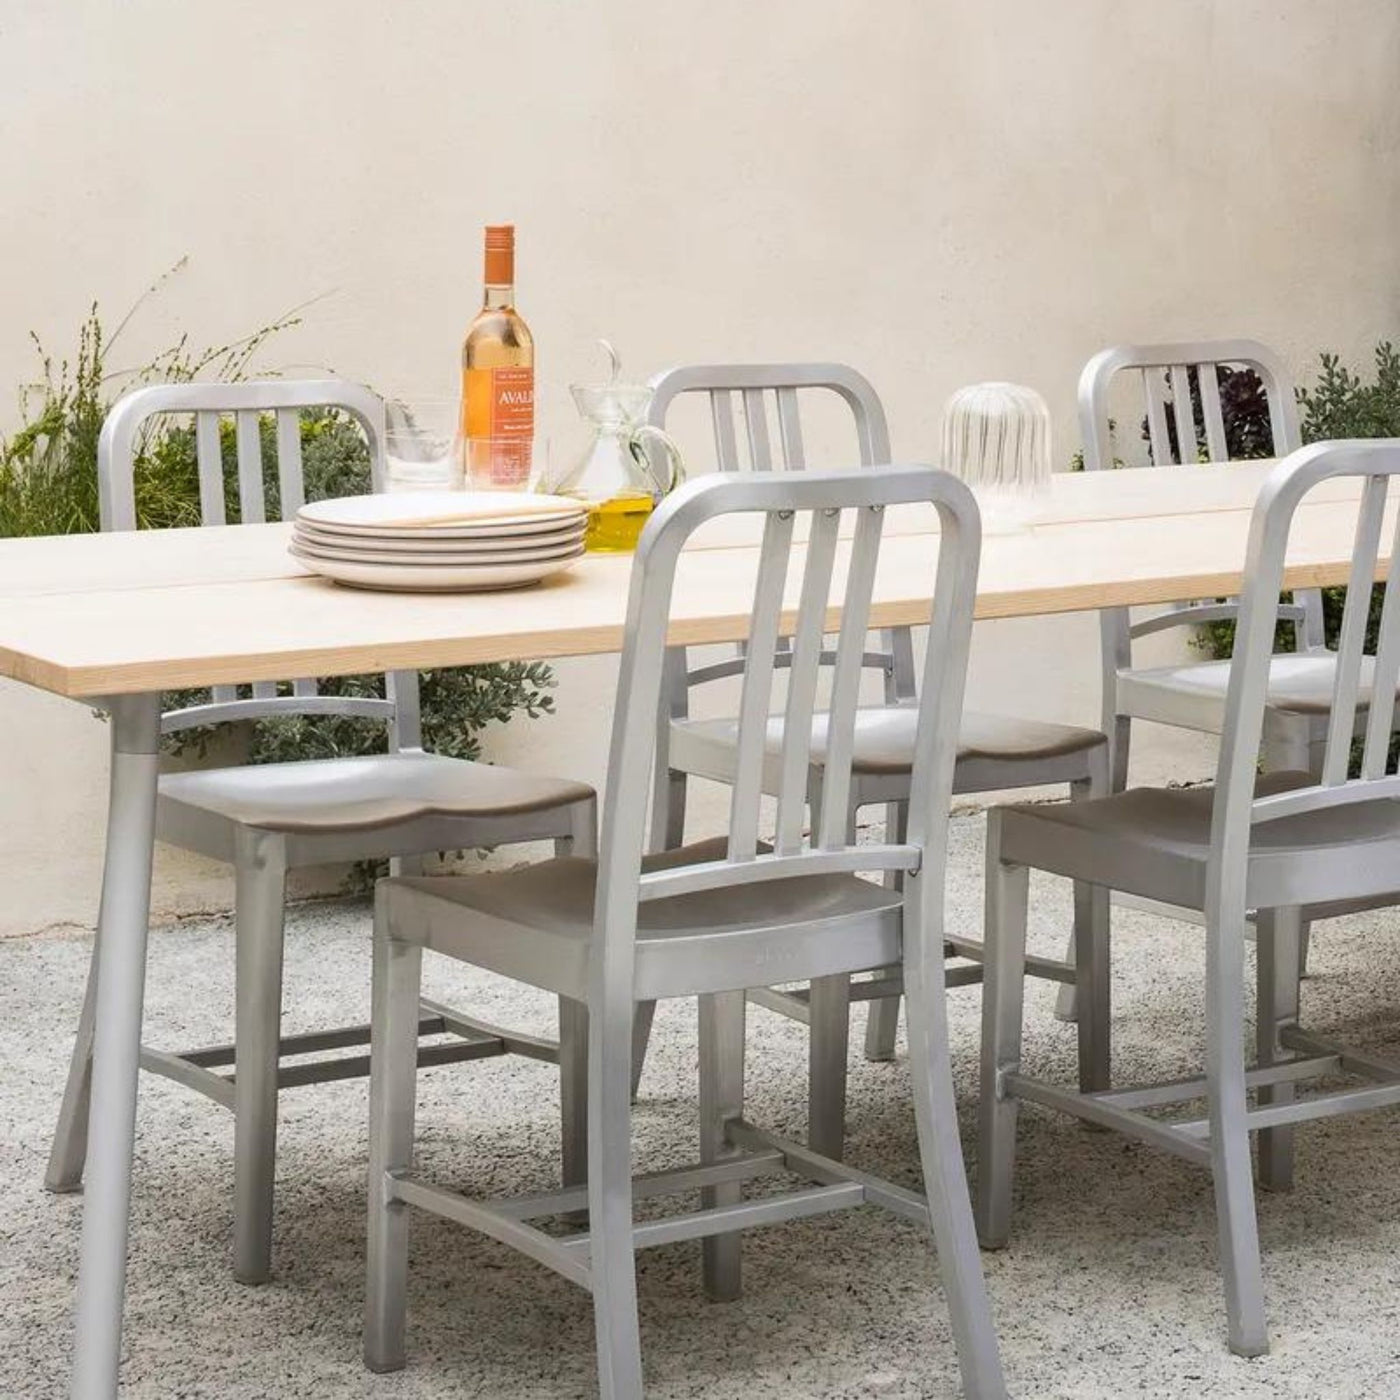 Emeco Navy Aluminum Chairs for Outdoor Dining Al Fresco